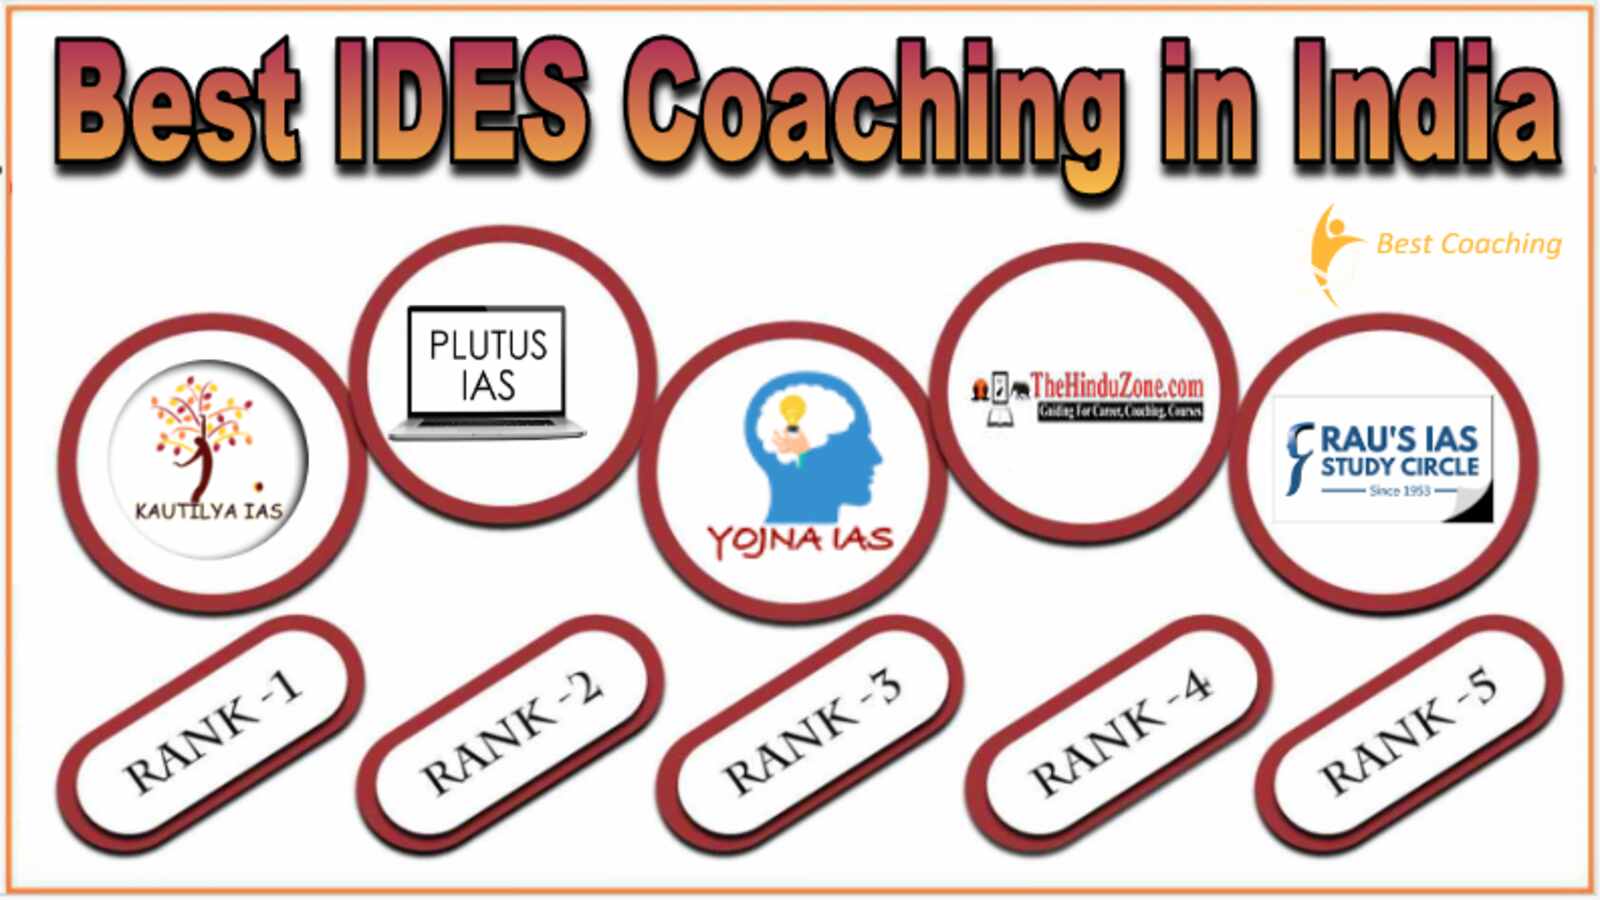 Best IDES Coaching in India